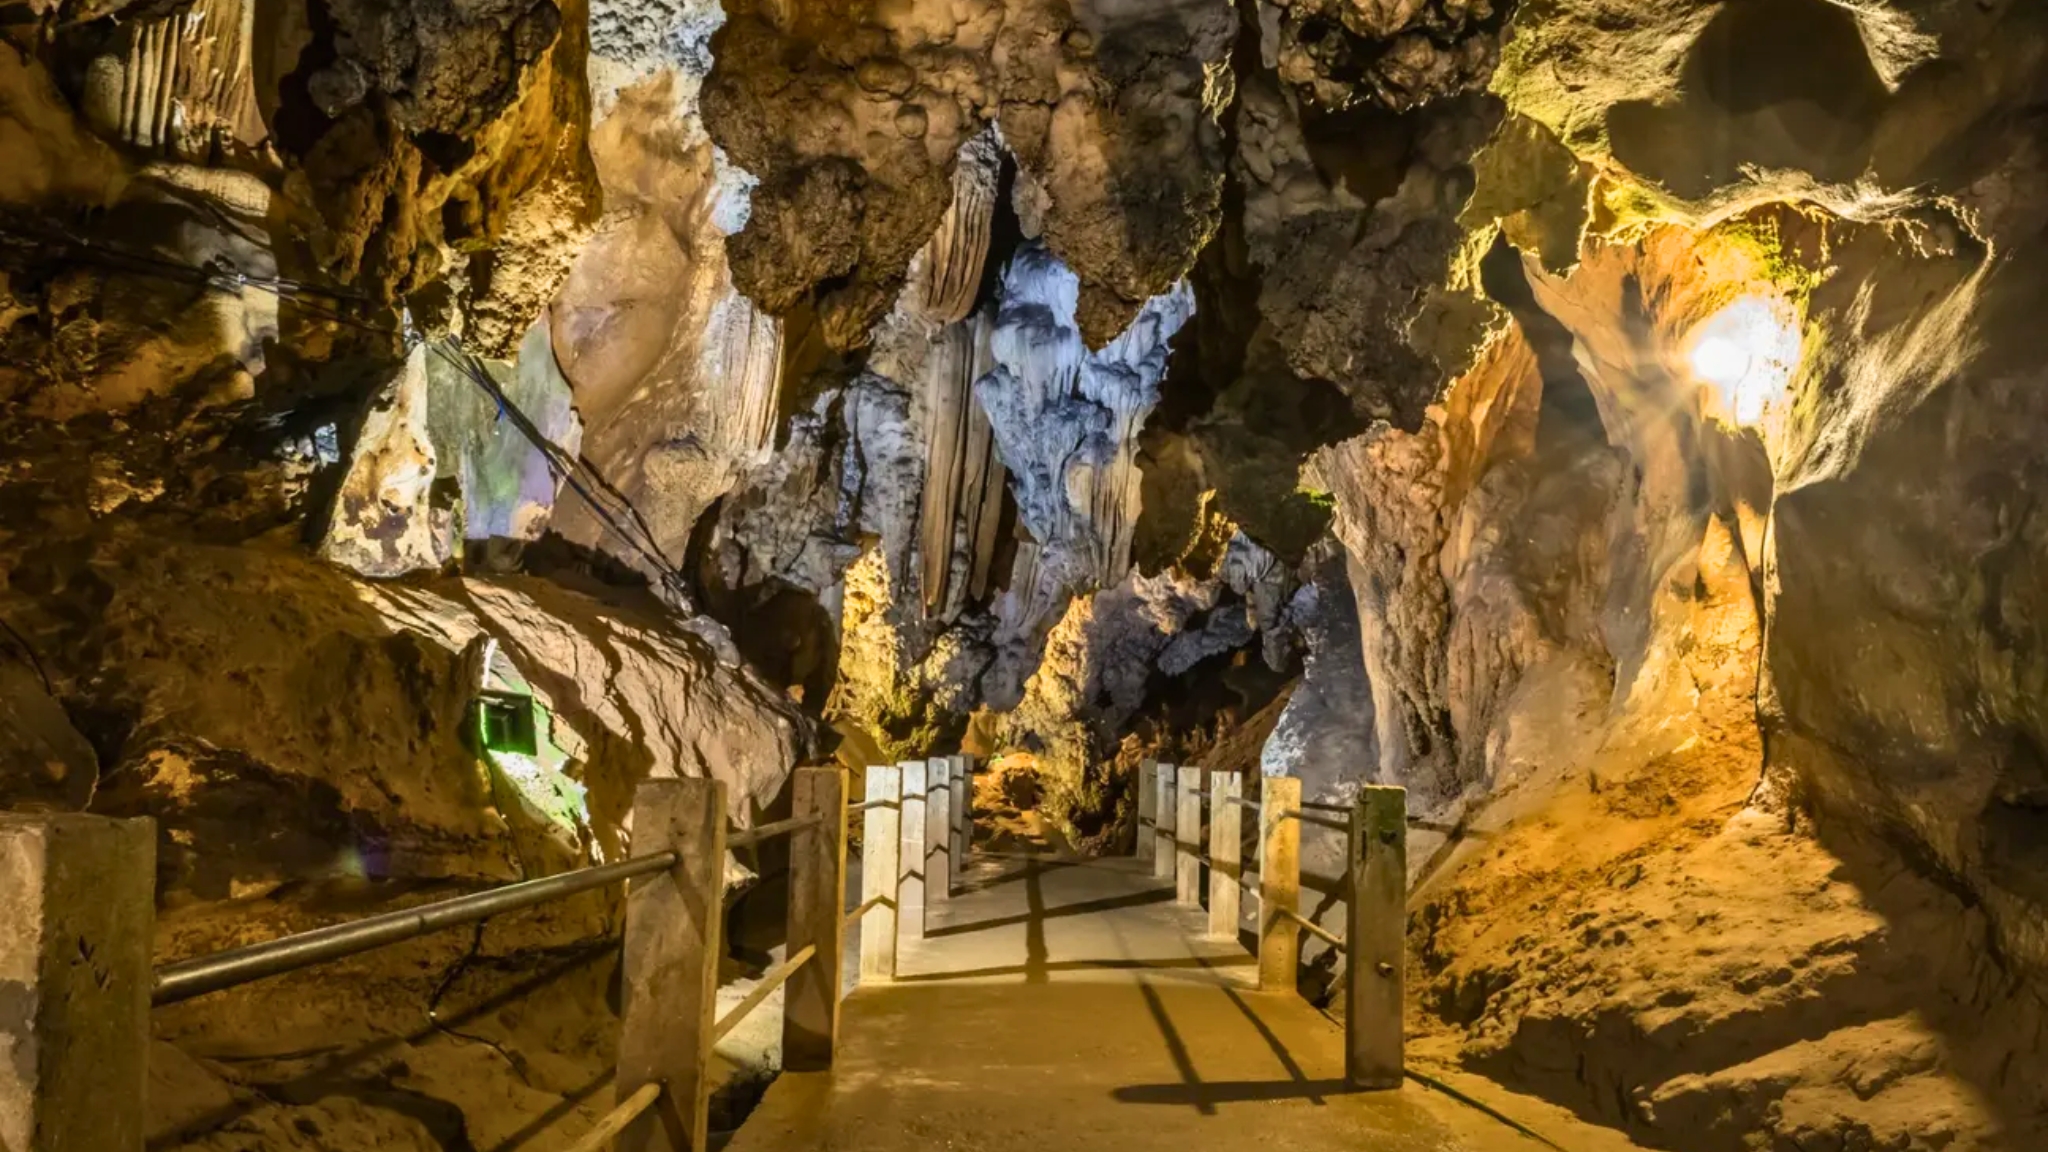 Day 5 Explore The Amazing Beauty Inside The Chiang Dao Cave